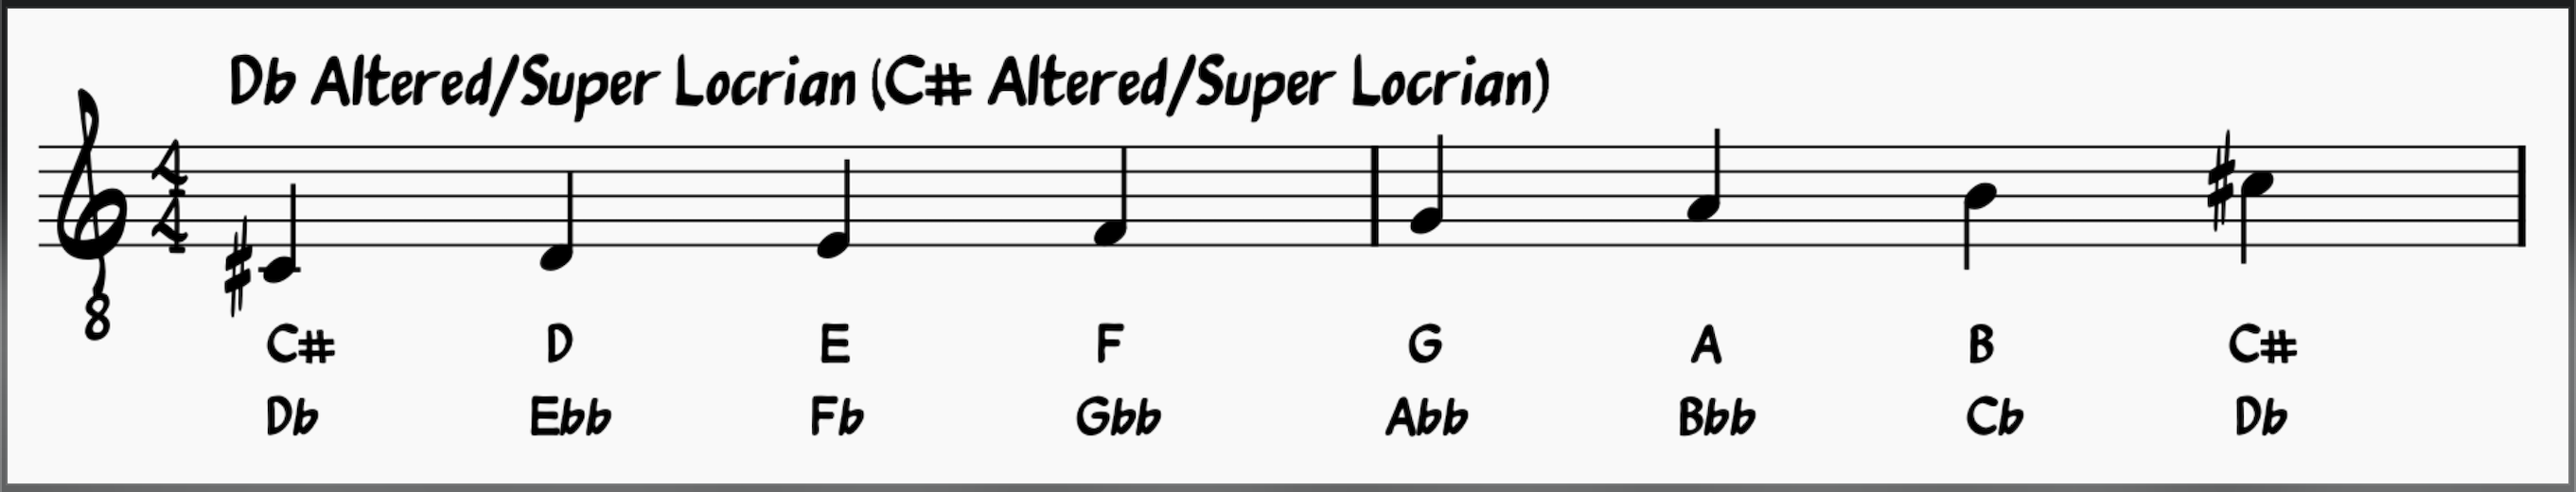 Chord Substitution: Altered Scale/Super Locrian w/ Different Spellings for Same Note